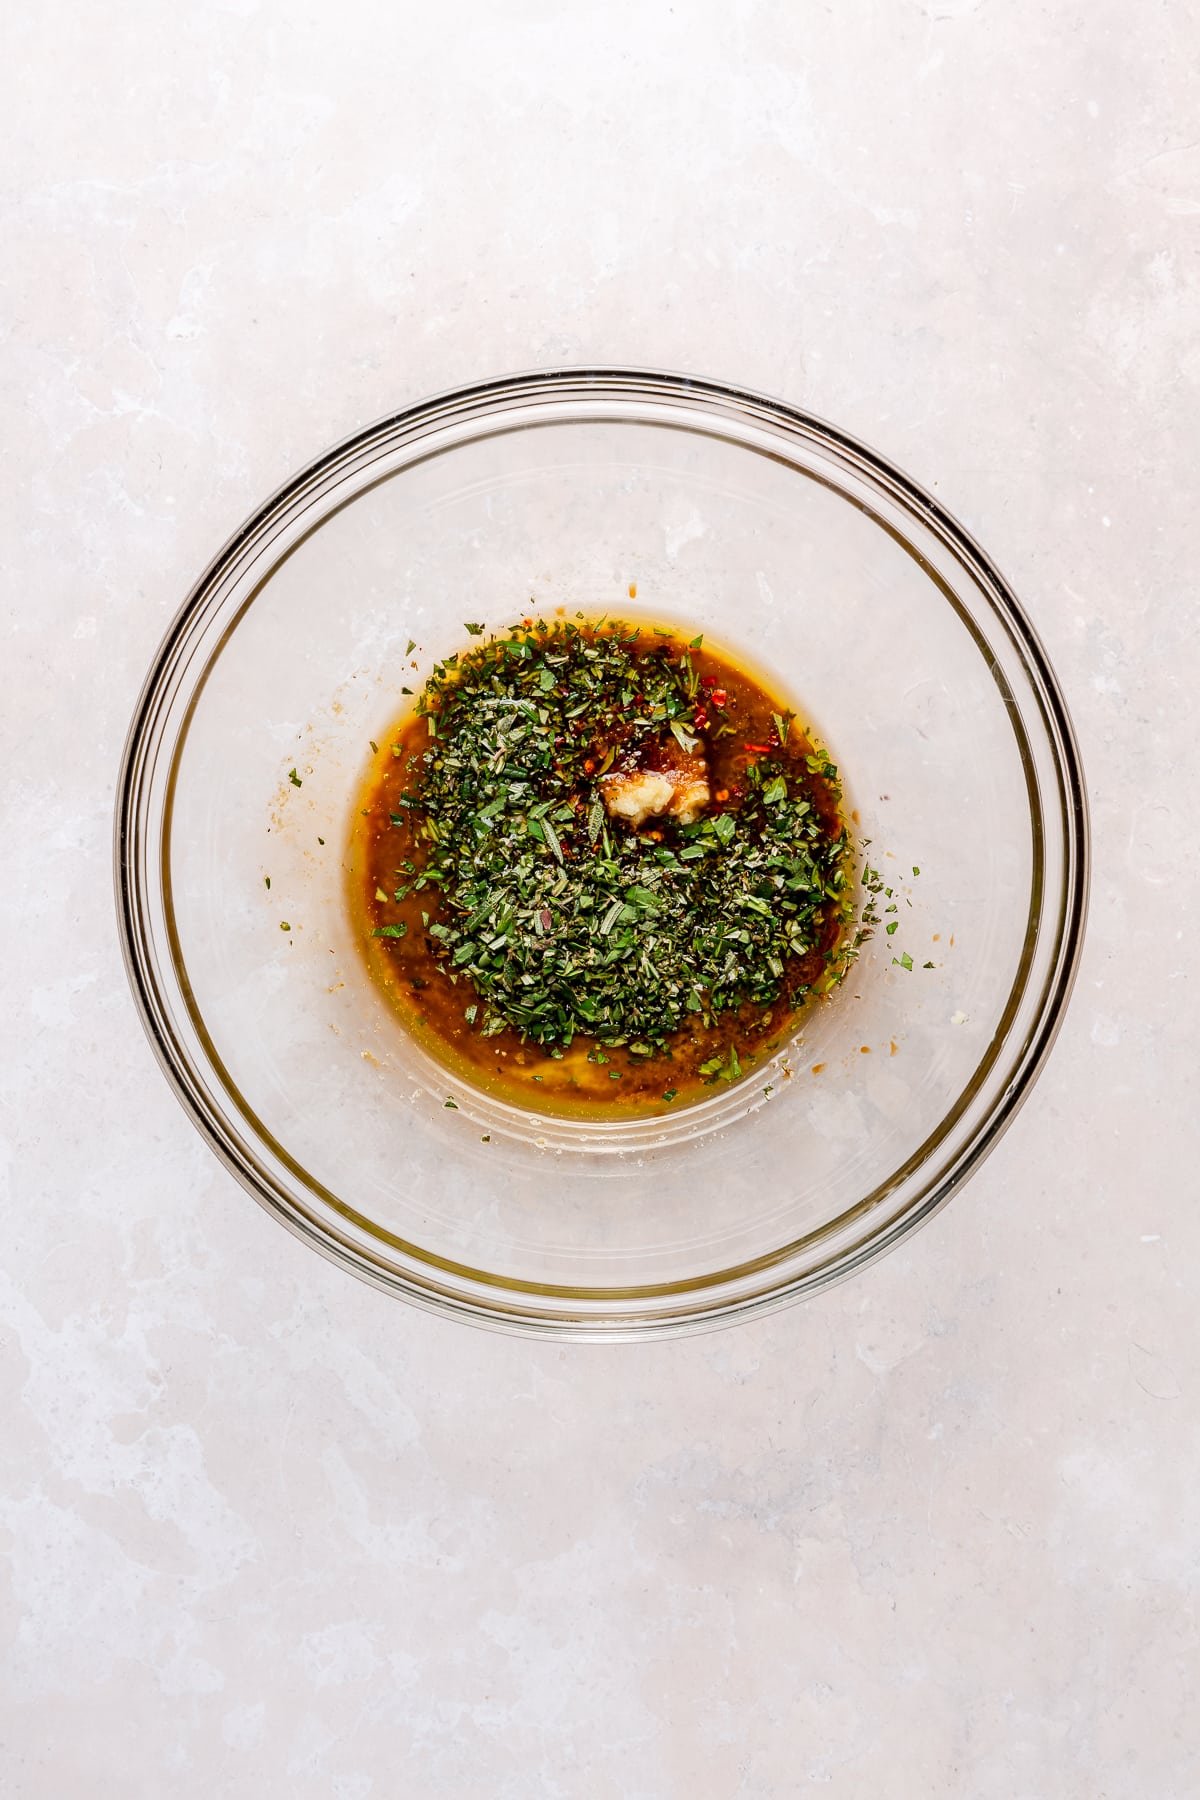 A variety of herby ingredients sit in a glass bowl.